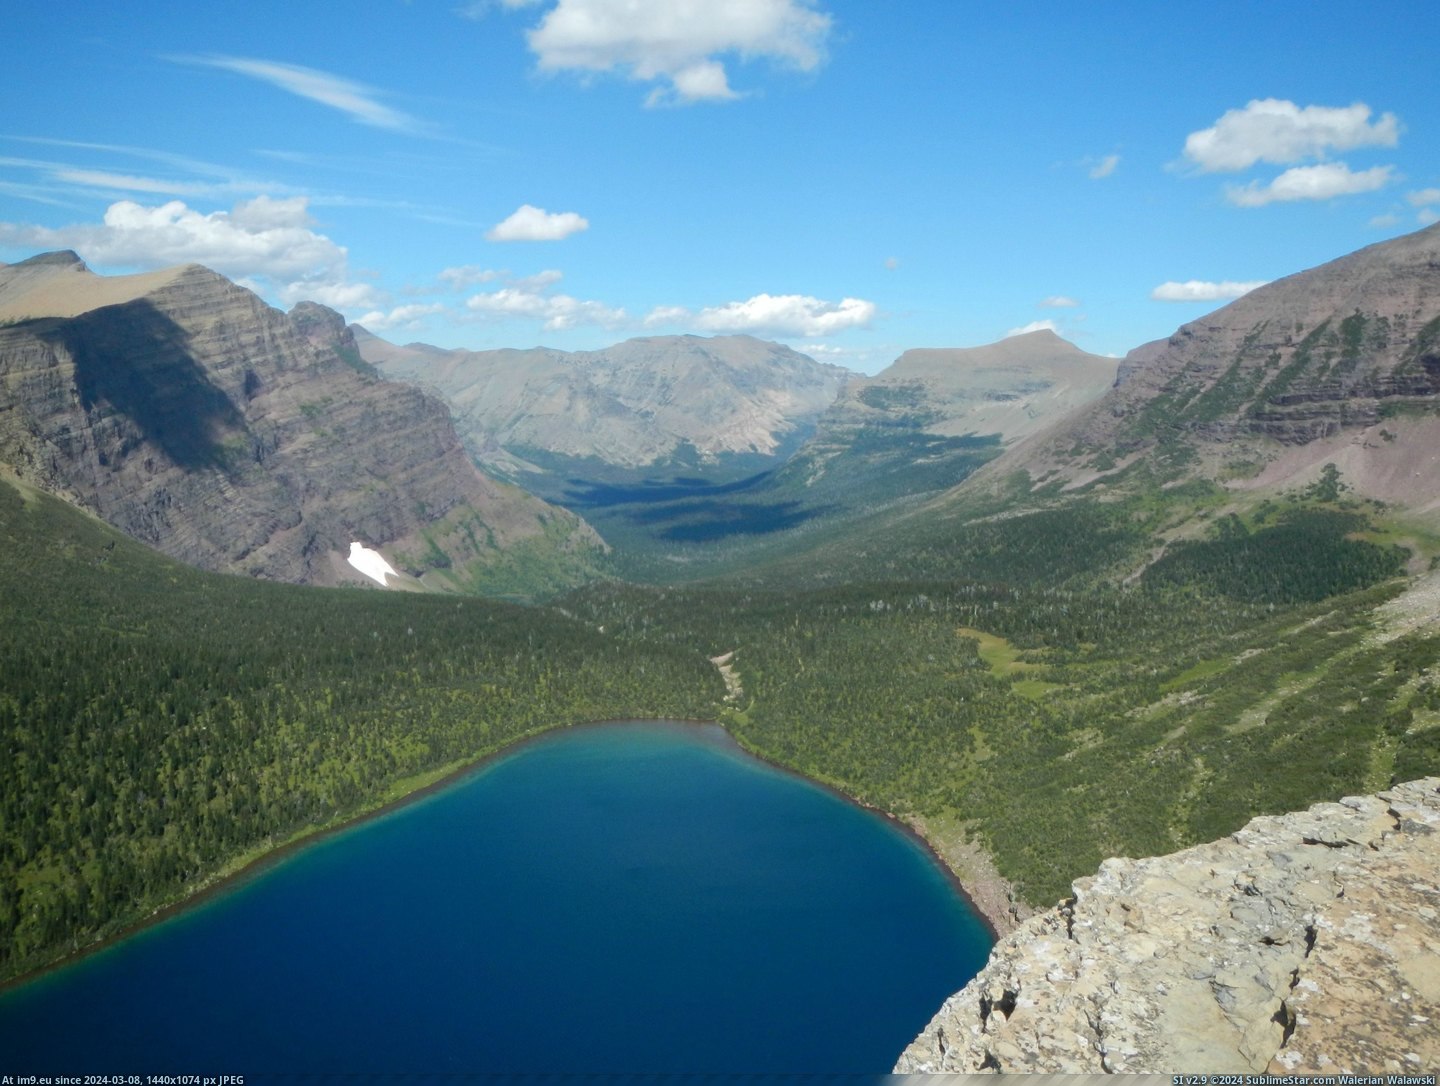 #Park #National #Lake #Continental #Divide #2764x2073 #Pitamakan #Glacier #Trail #Photograph [Earthporn] Photograph of Pitamakan lake taken near the Continental Divide Trail. Glacier National Park, MT [OC] [2764x2073] Pic. (Image of album My r/EARTHPORN favs))